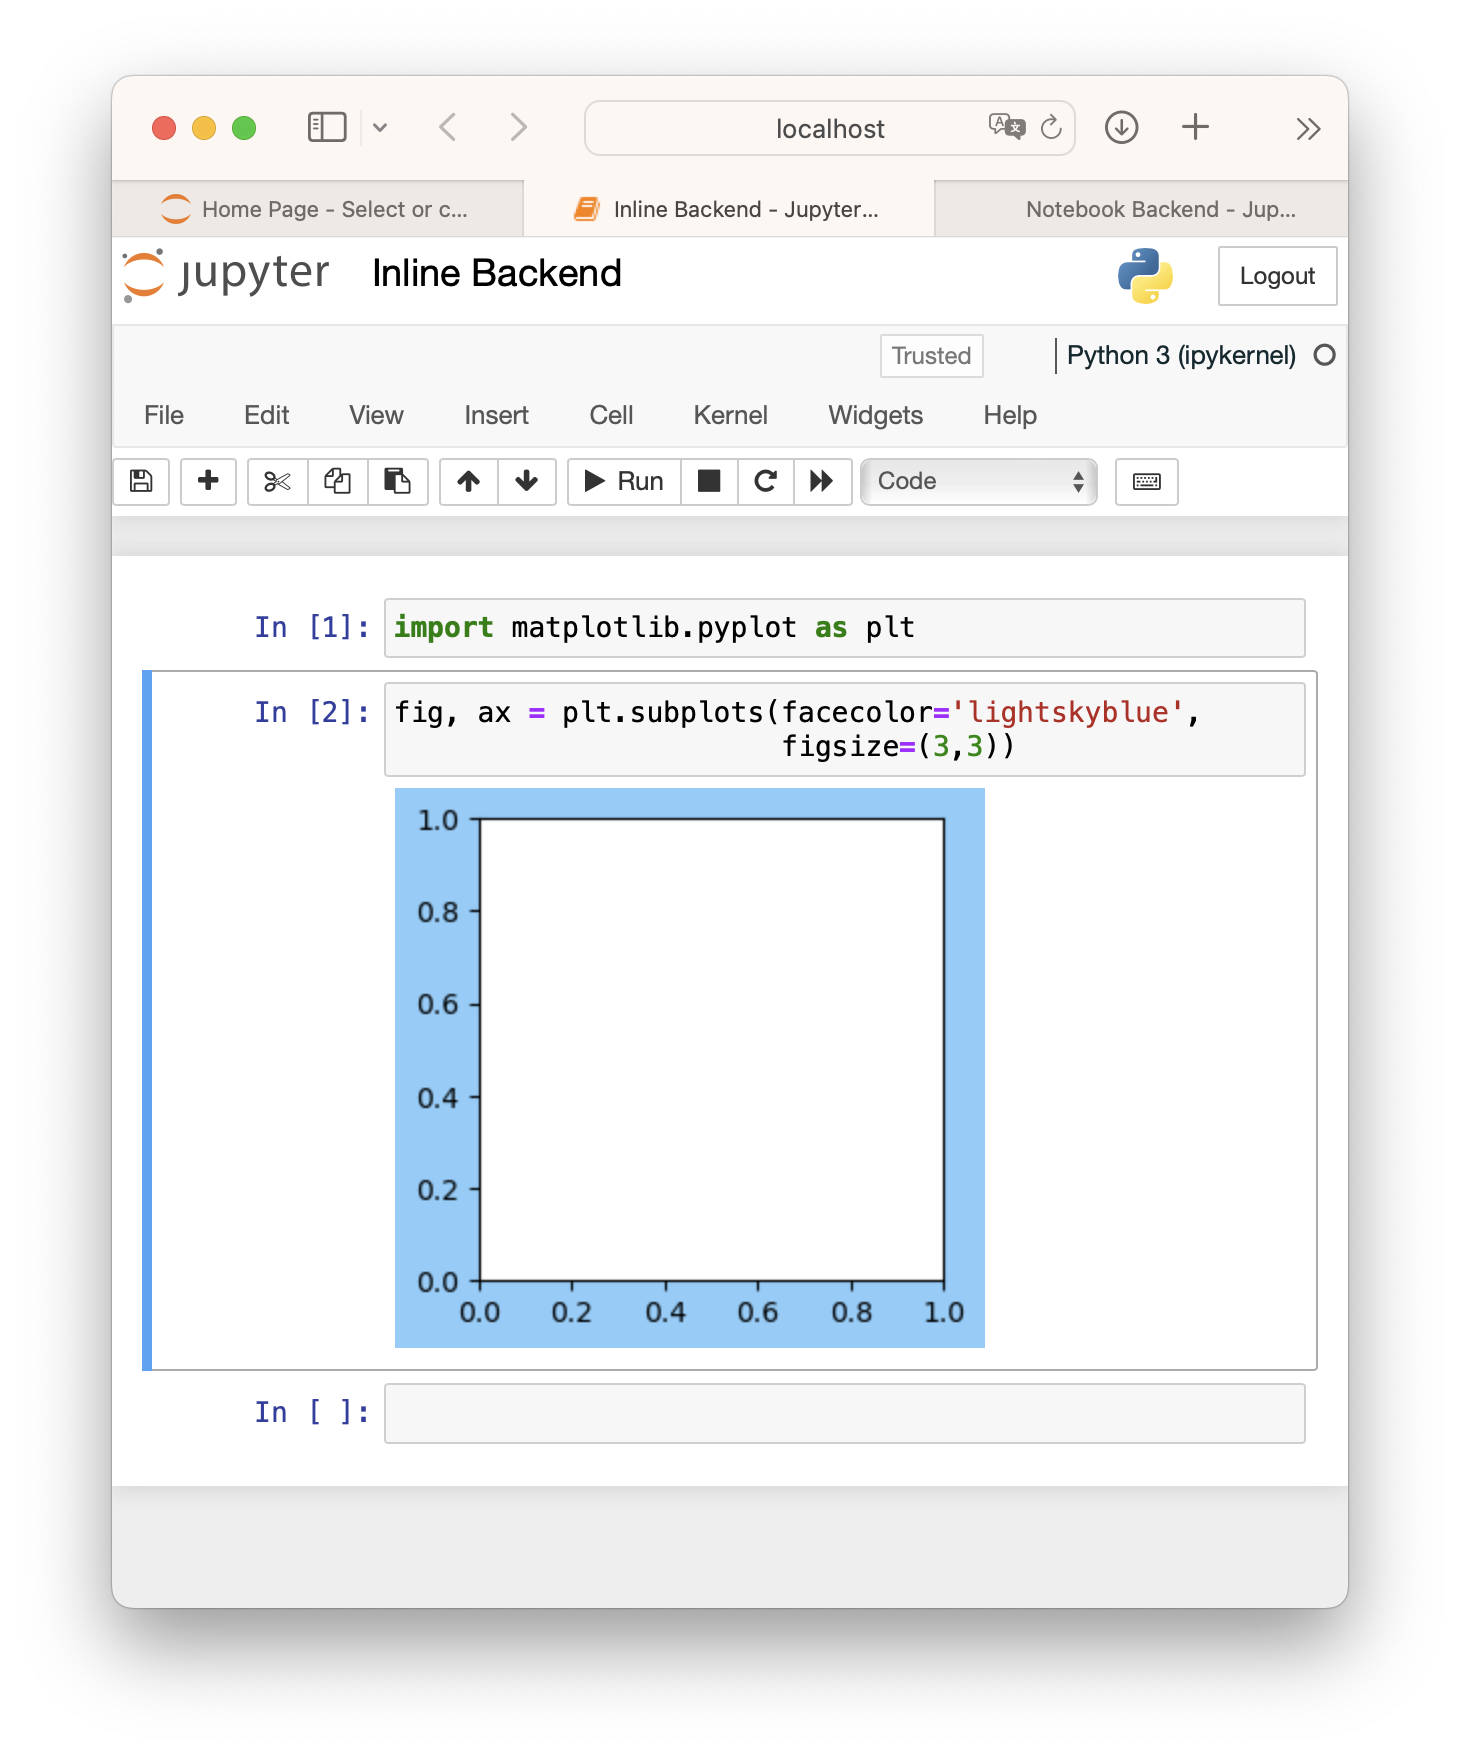 Image of figure generated in Jupyter Notebook with inline backend.